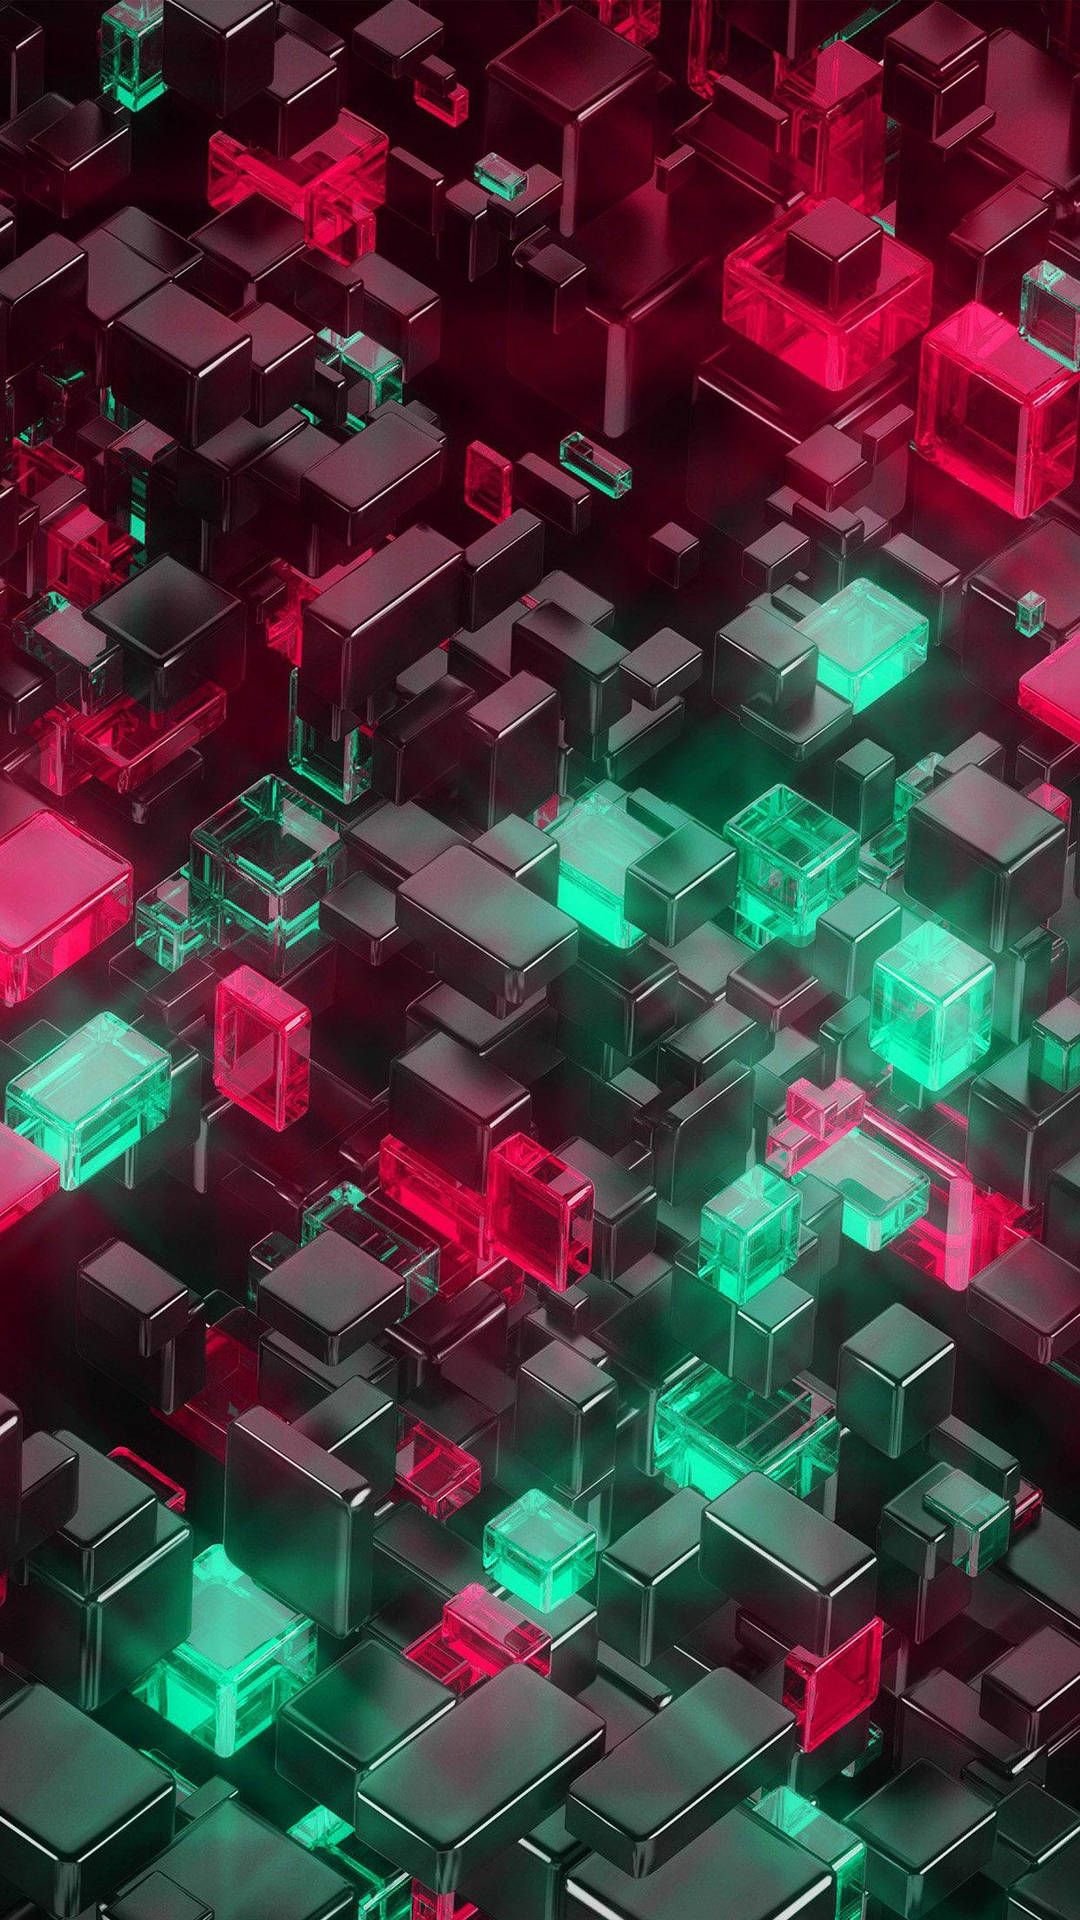 Caption: Captivating 3D Rendering of Opaque and Transparent Cubes on Mobile Wallpaper